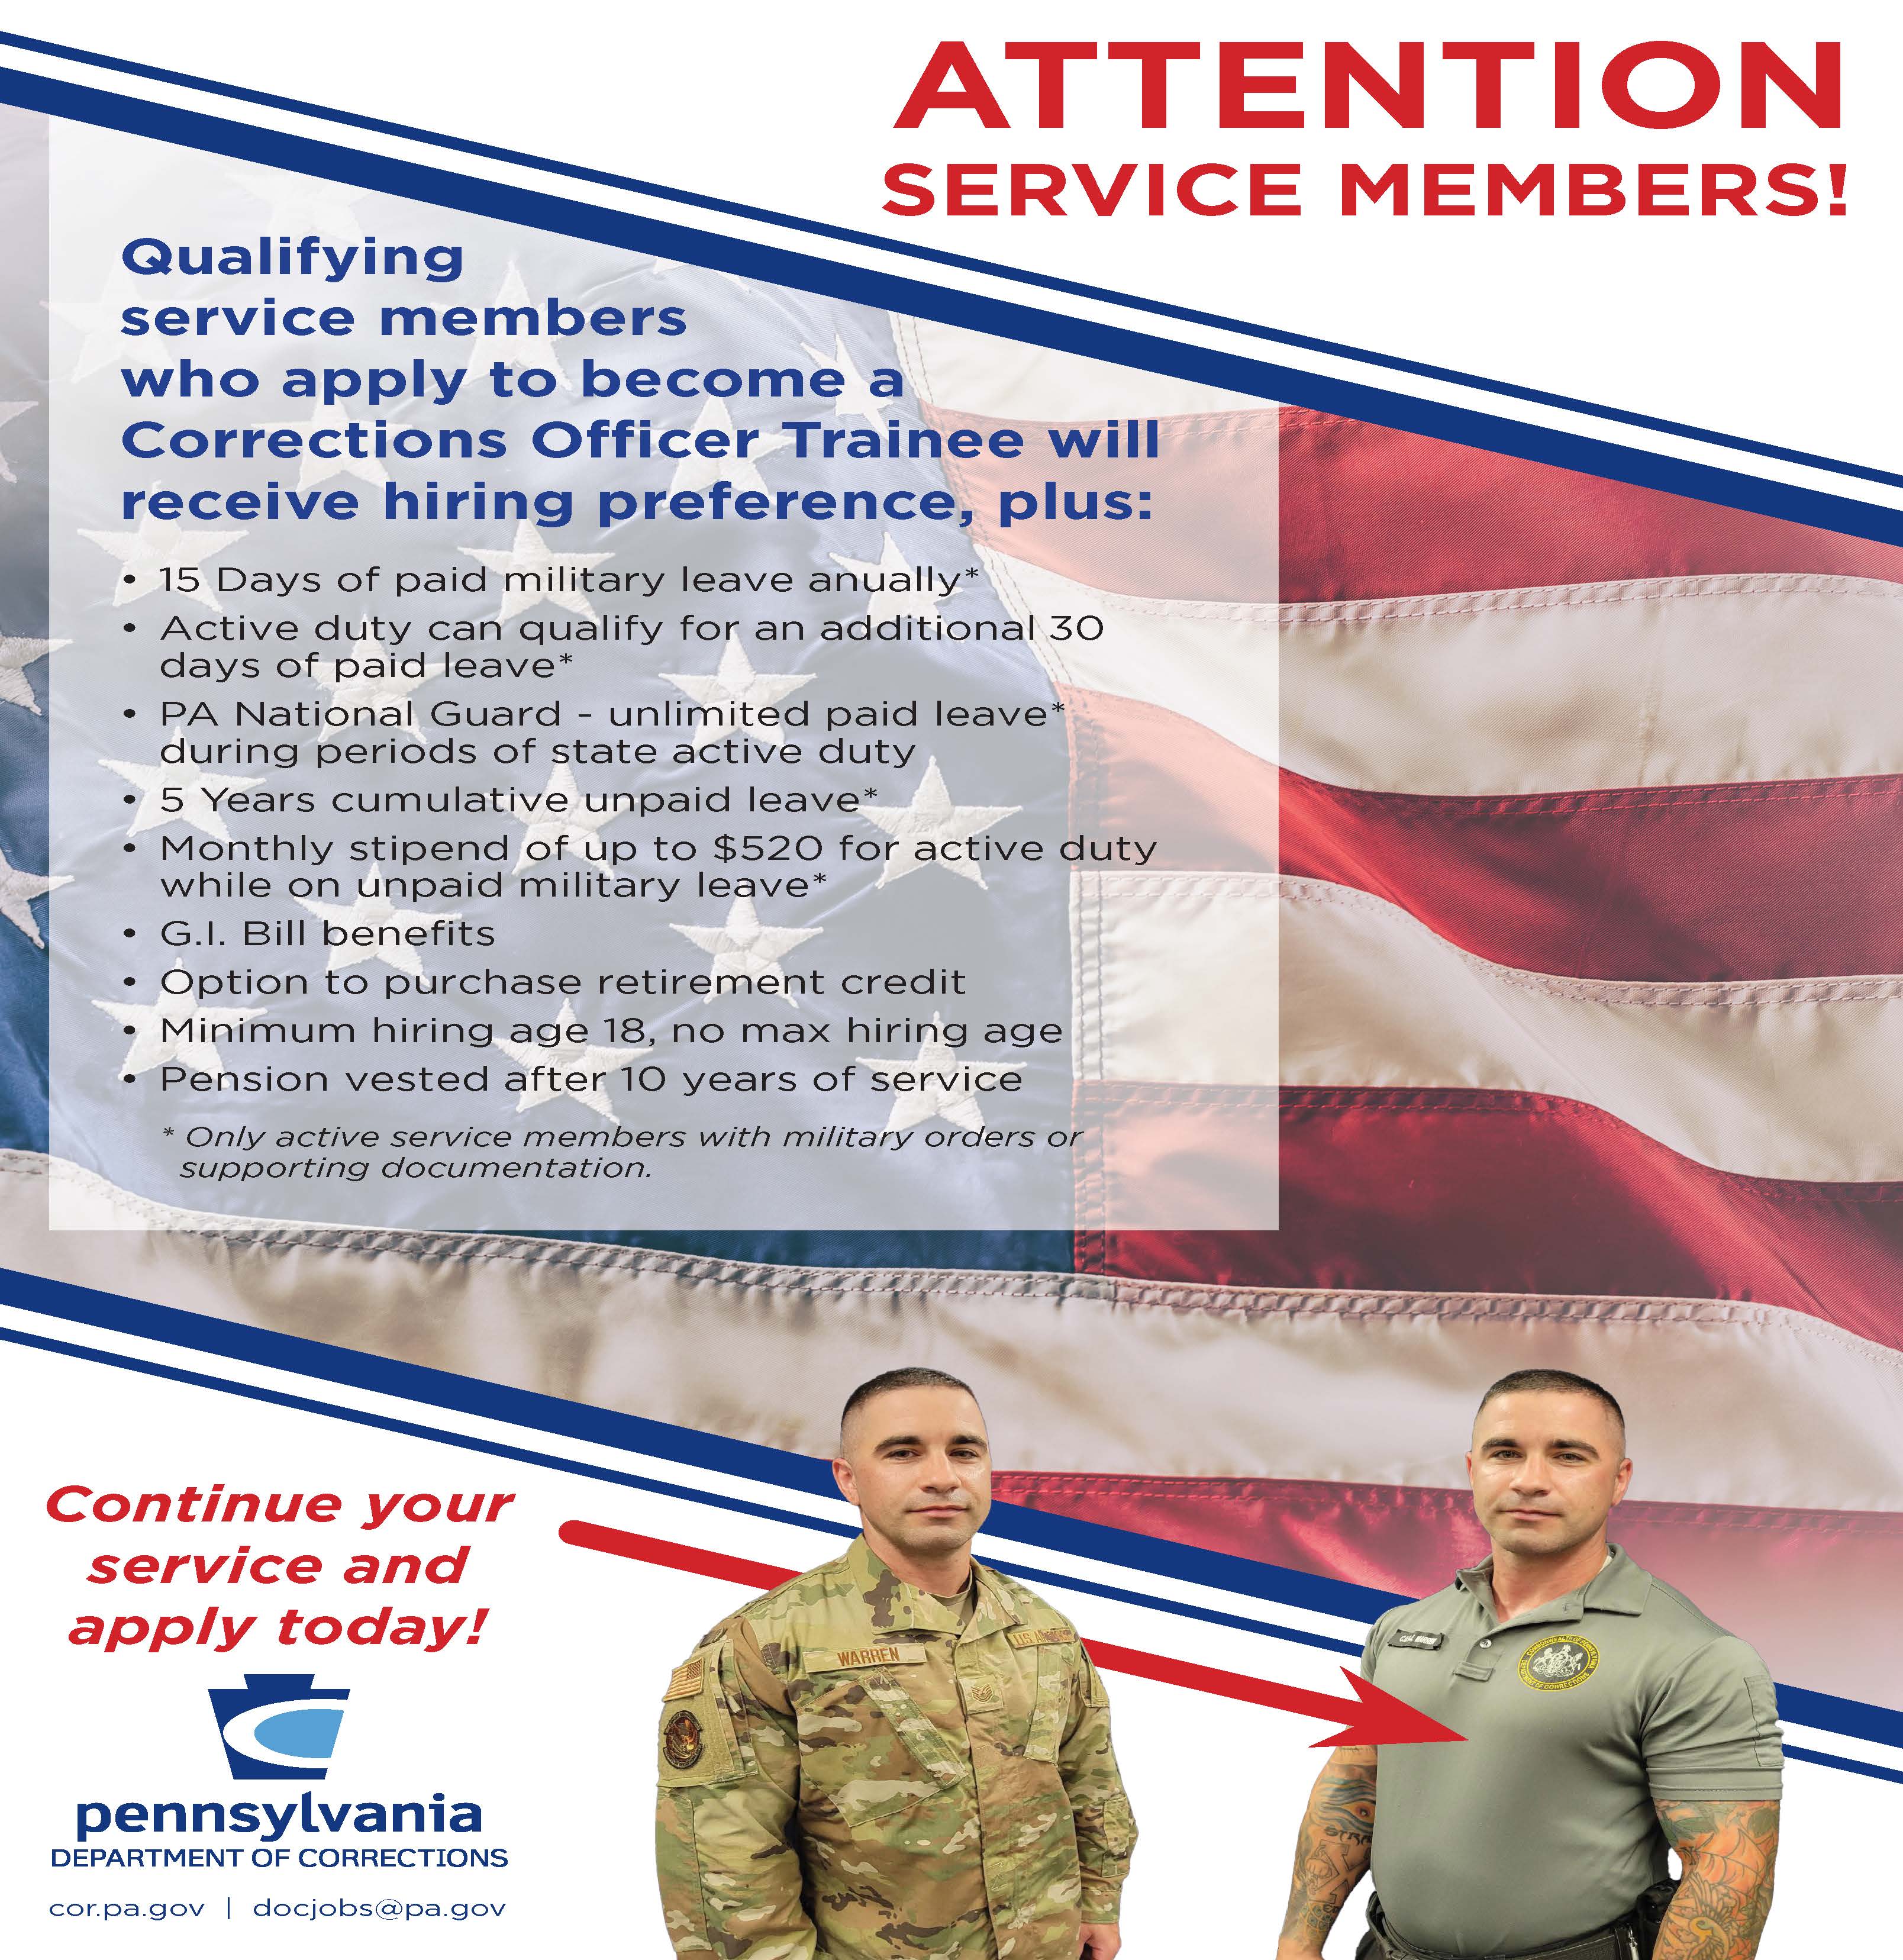 A flyer for veterans about the benefits of working in the Department of Corrections.